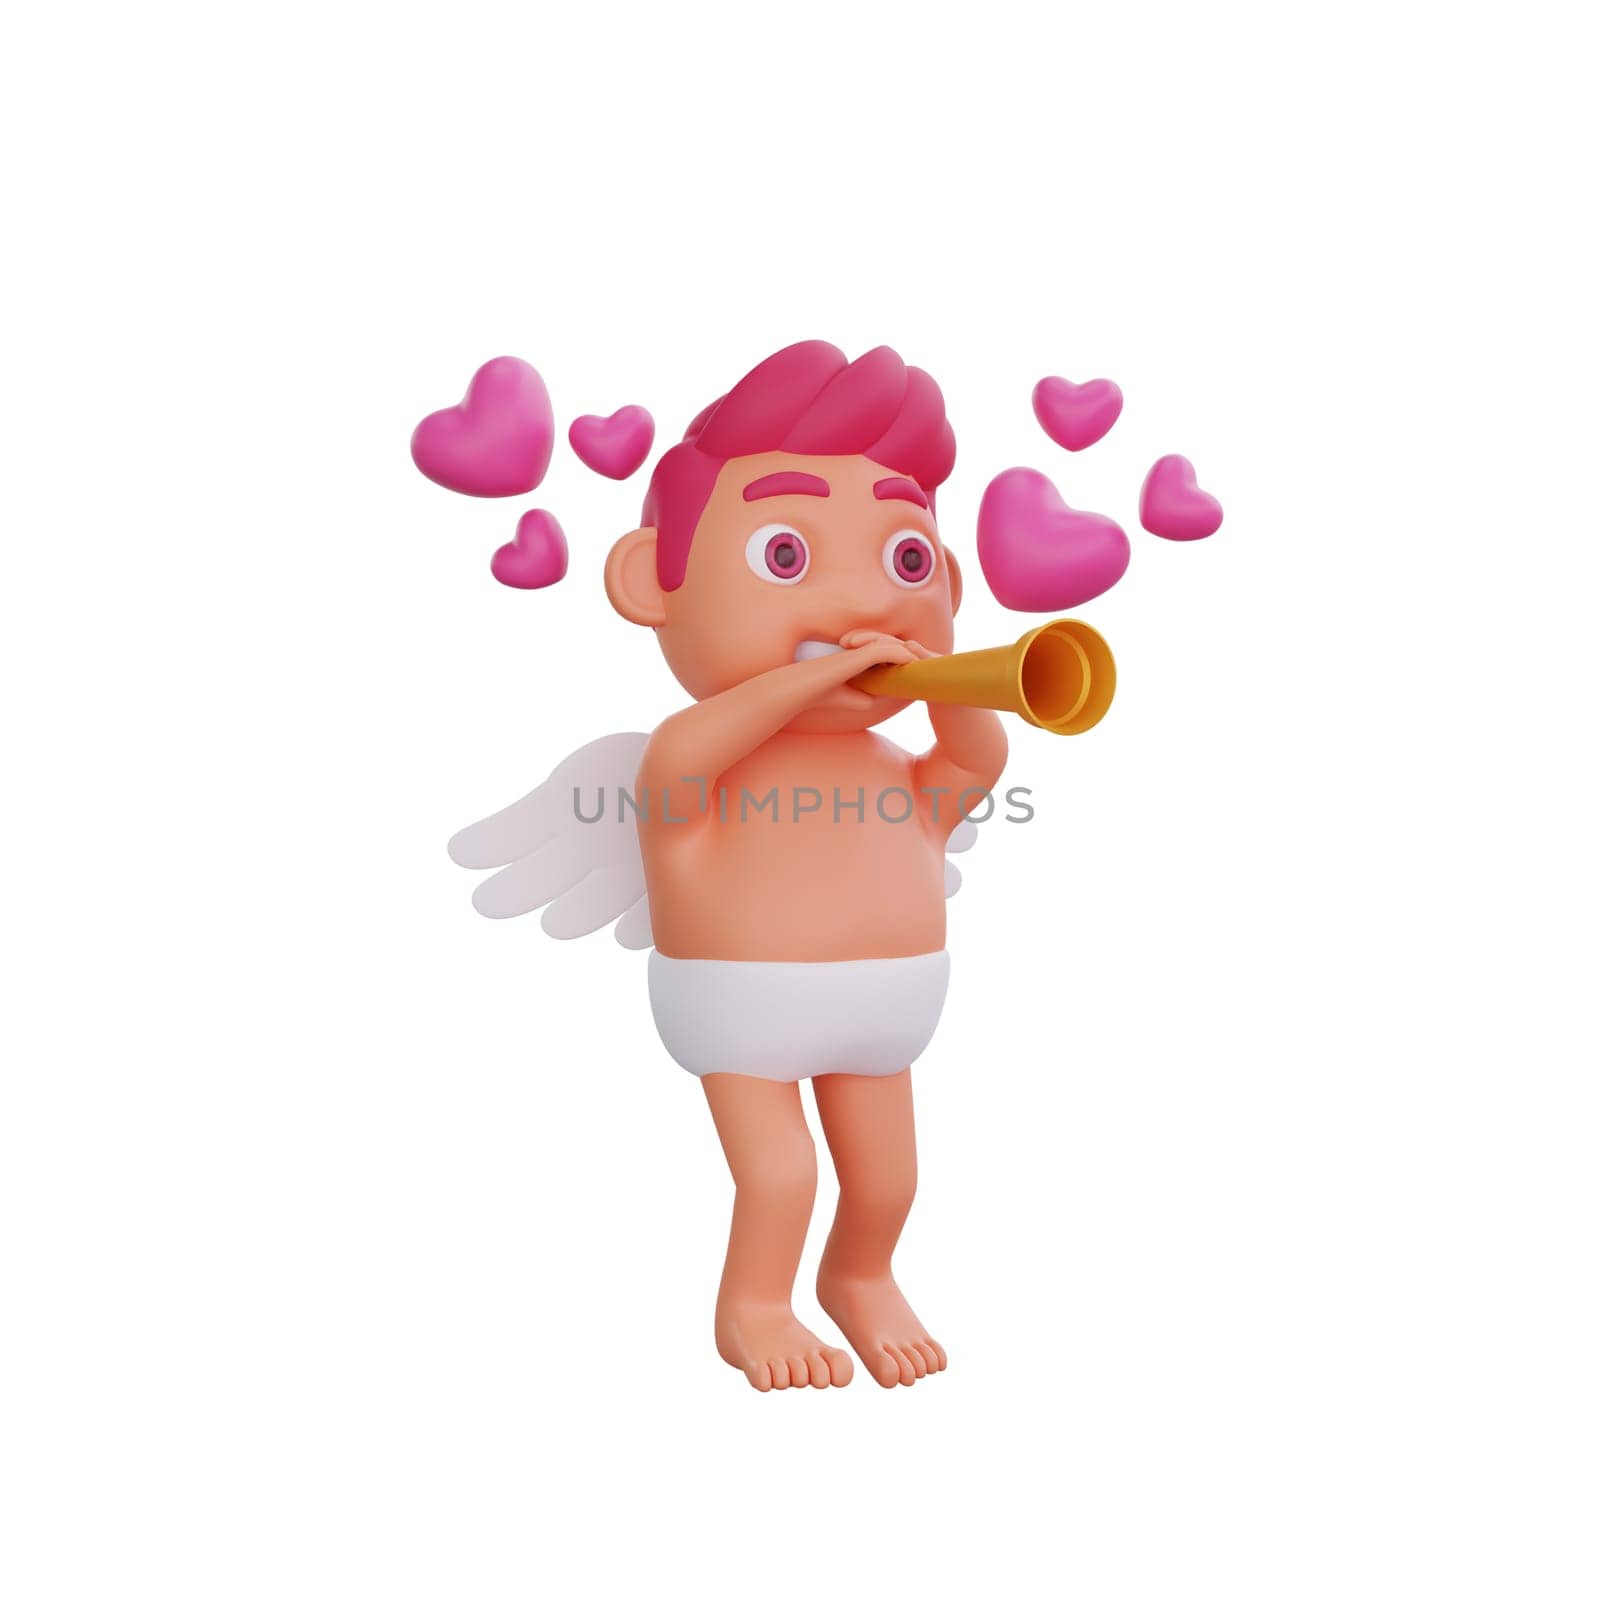 3D illustration of Valentine Cupid character playing a golden trumpet, sending out waves of pink hearts, perfect for Valentine or love themed projects